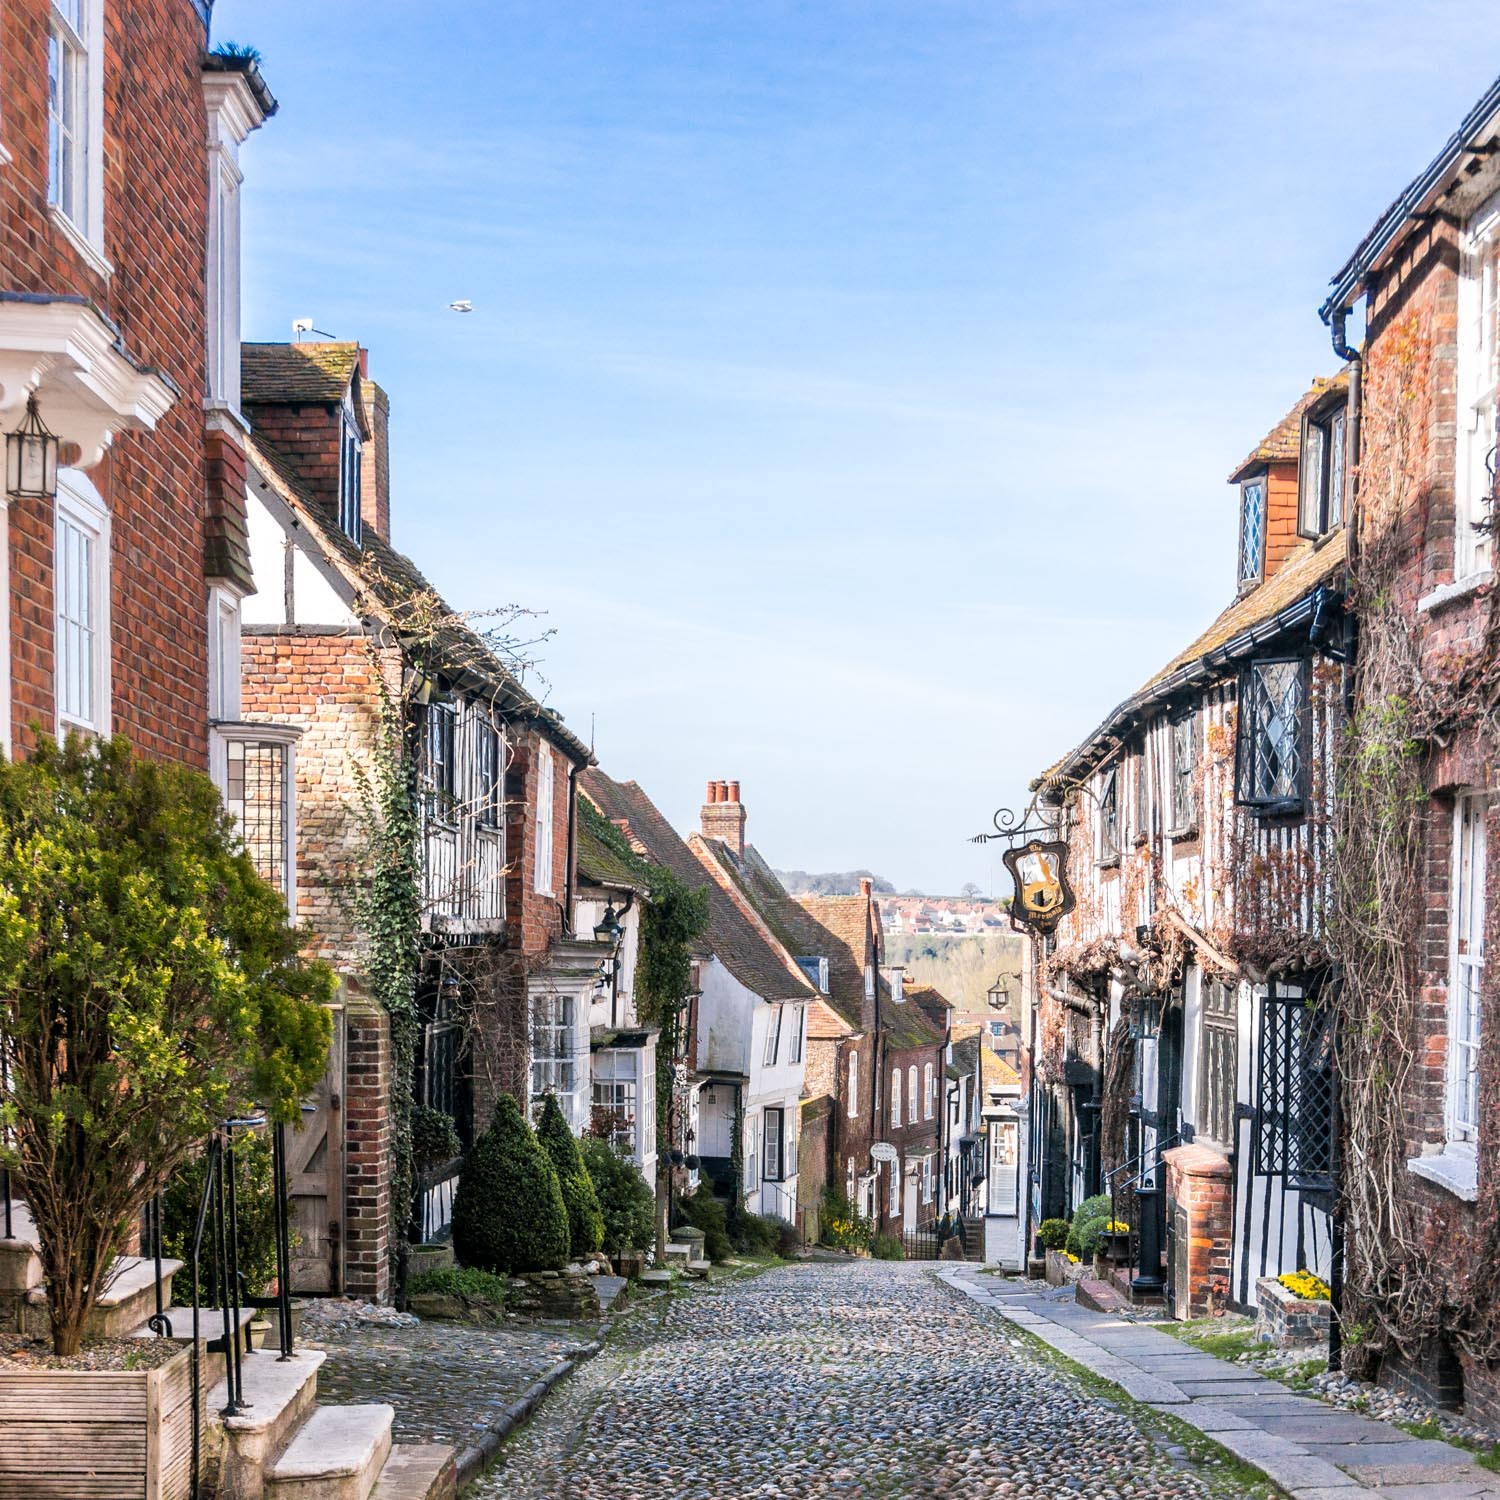 Day trip to Rye, East Sussex